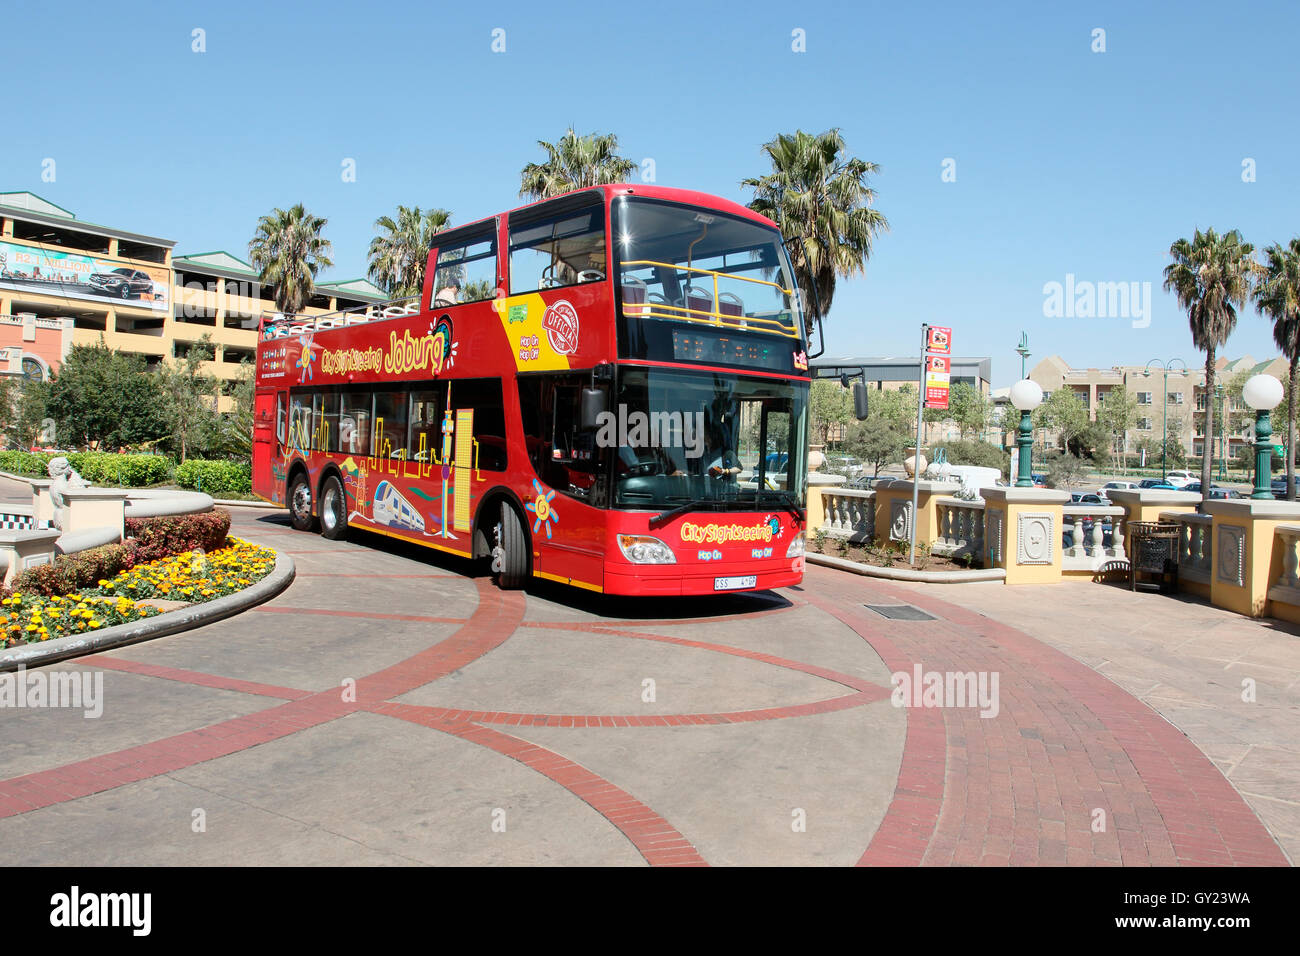 Sight seeing tourist bus, Johannesburg, South Africa, August 2016 Stock Photo